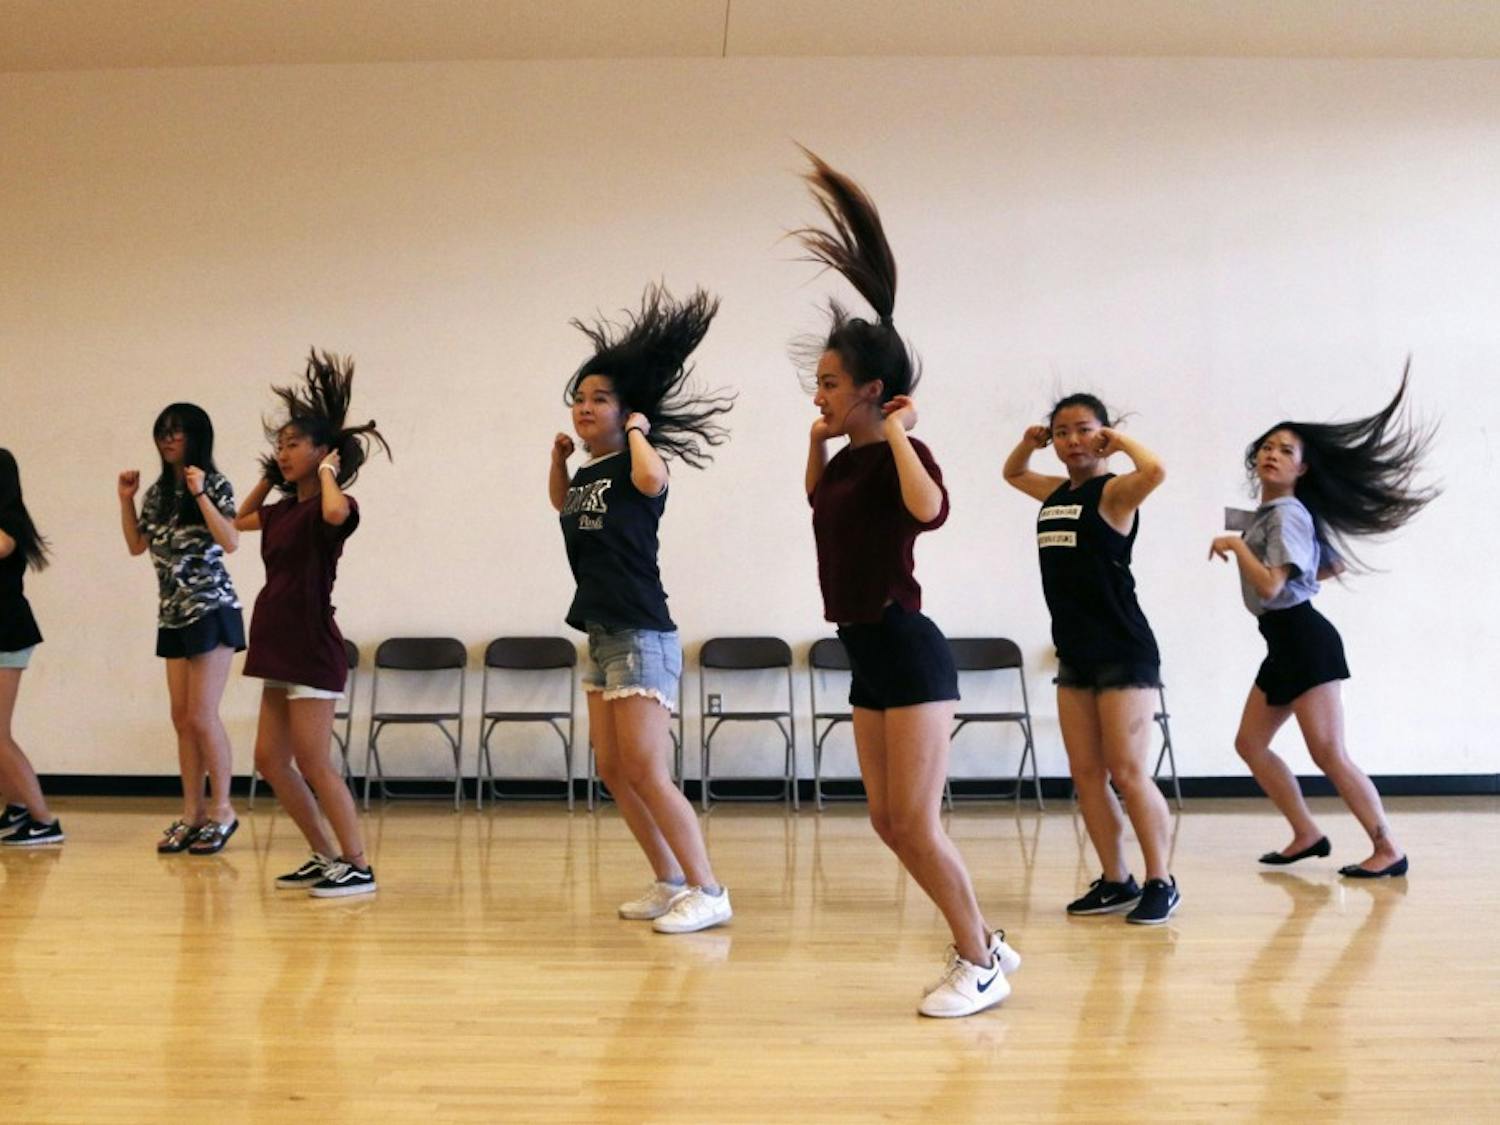 The ASU K-Pop club practices a dance routine at the Sun Devil Fitness Compex on Friday, Oct. 21, 2016. 